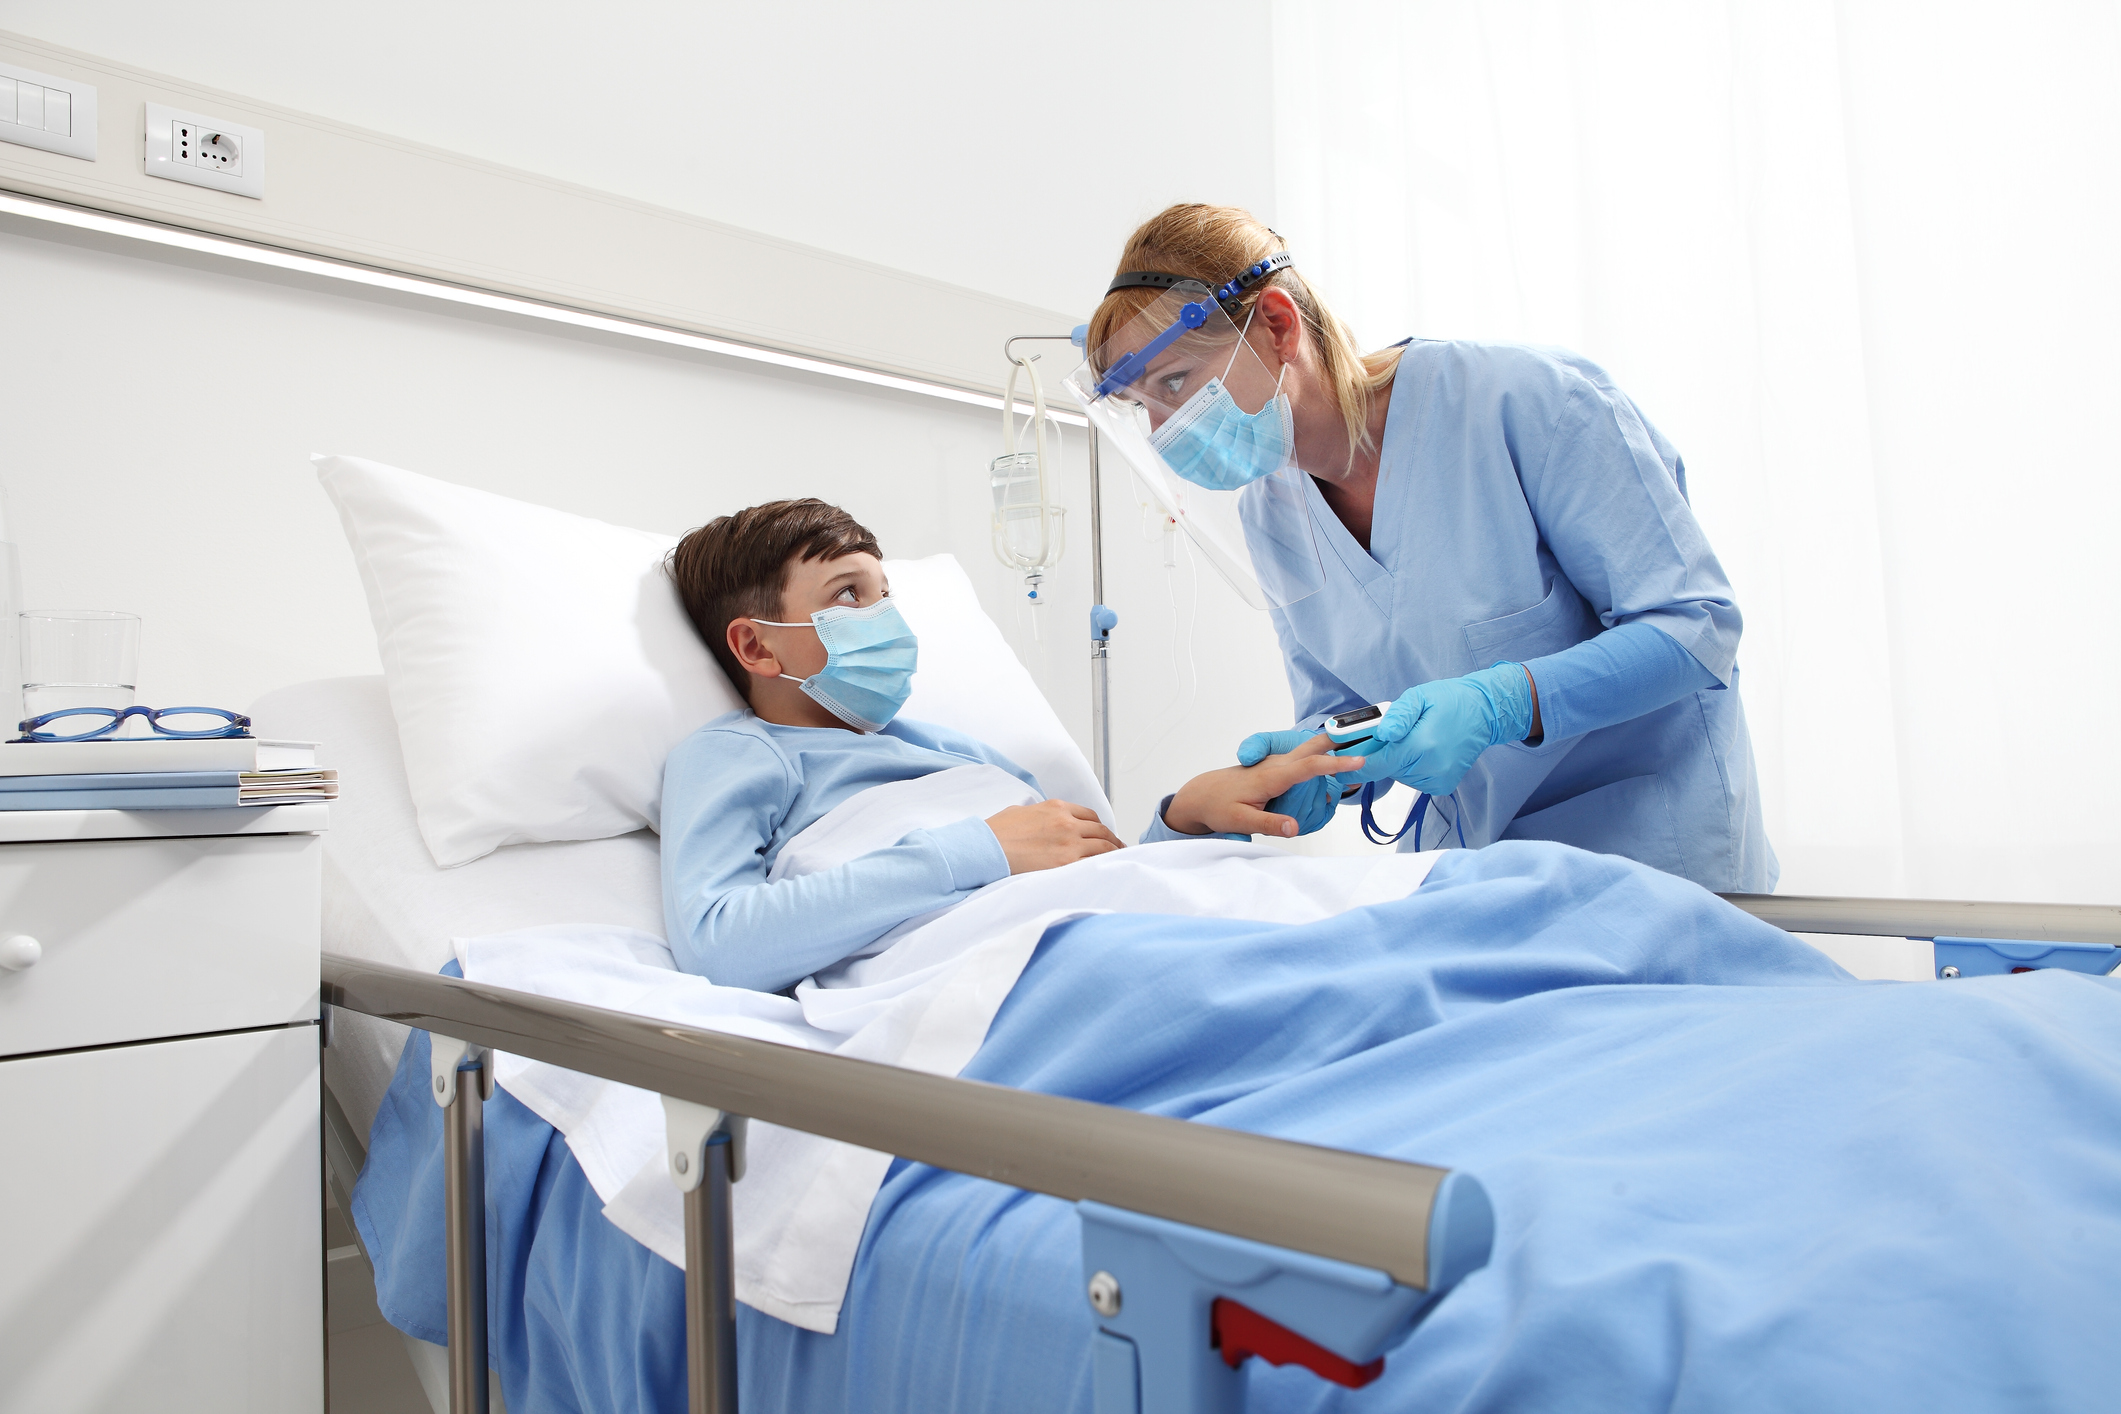 nurse with pulse oximeter on patient child in hospital bed, wearing protective visor mask, corona virus covid 19 protection concept,